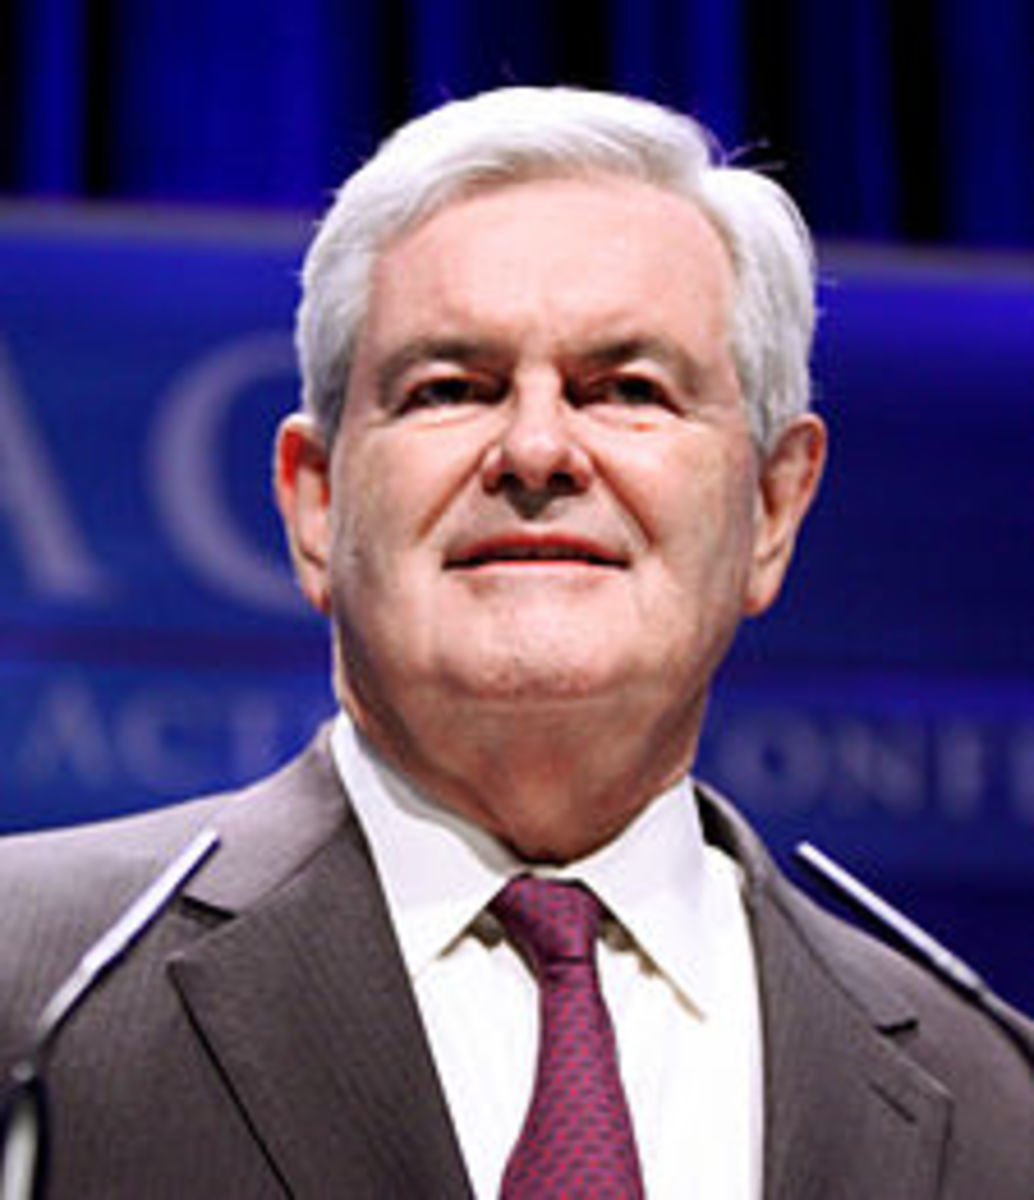 REPUBLICAN PRESIDENTIAL CANDIDATE NEWT GINGRICH